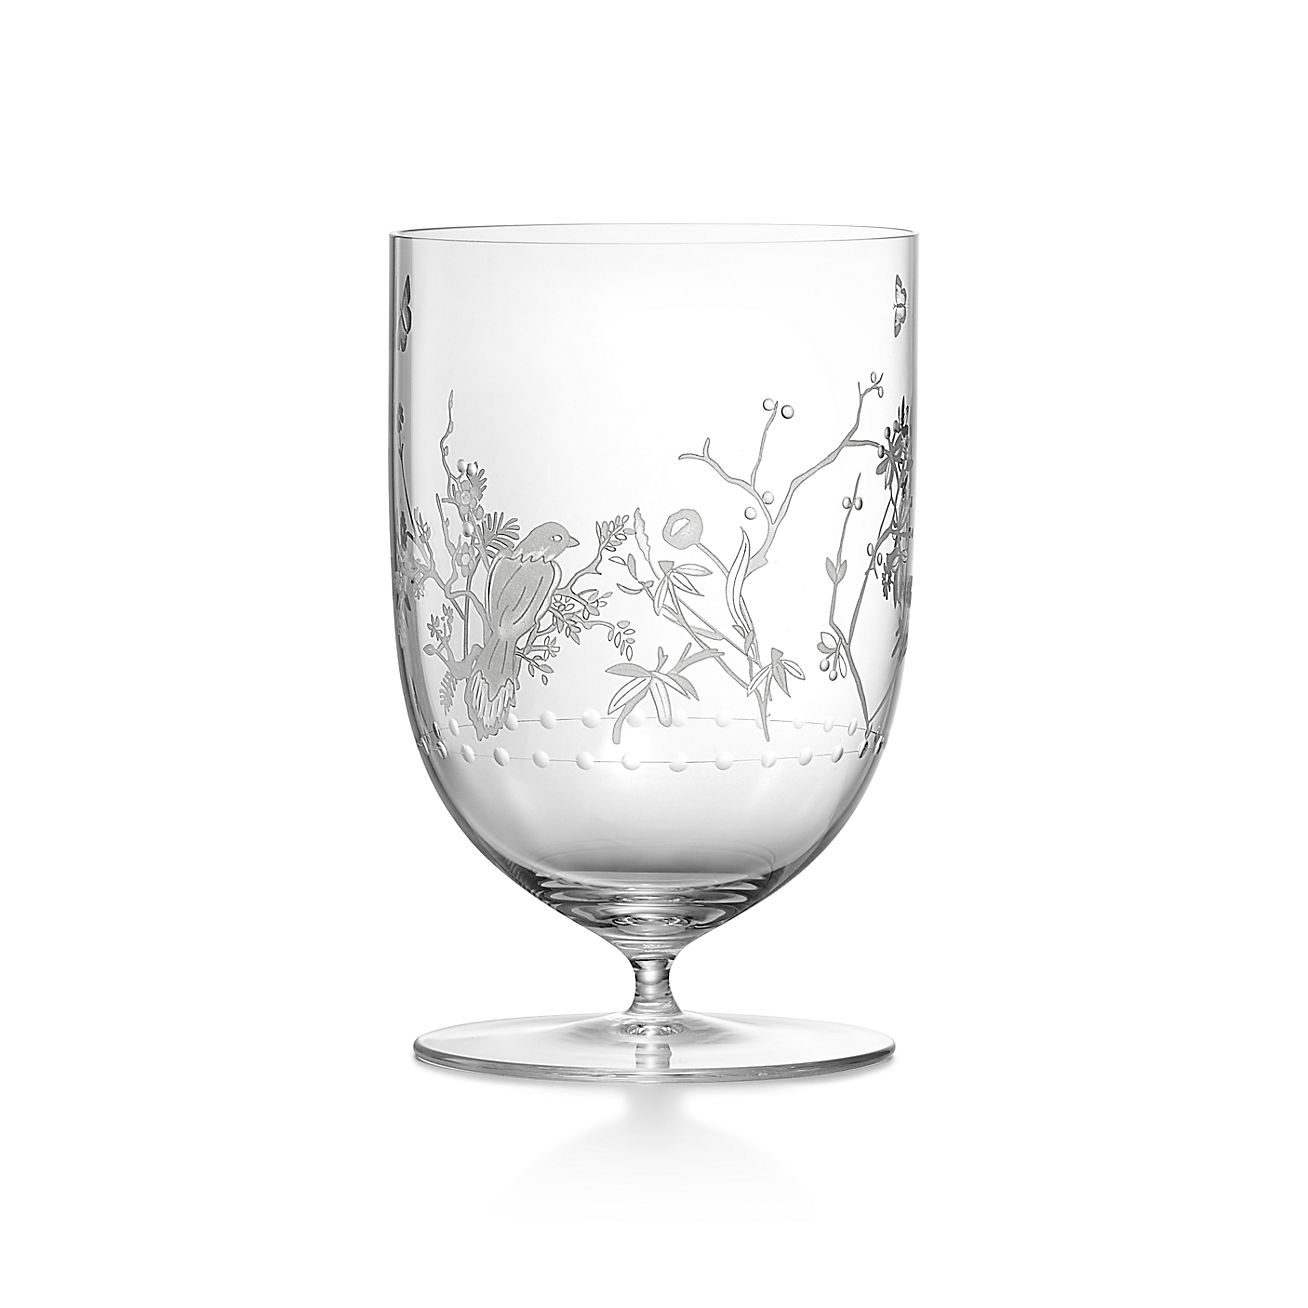 Tiffany & Co Tiffany Audubon Water Glass In Hand-etched Glass In Glass/no Gemstones